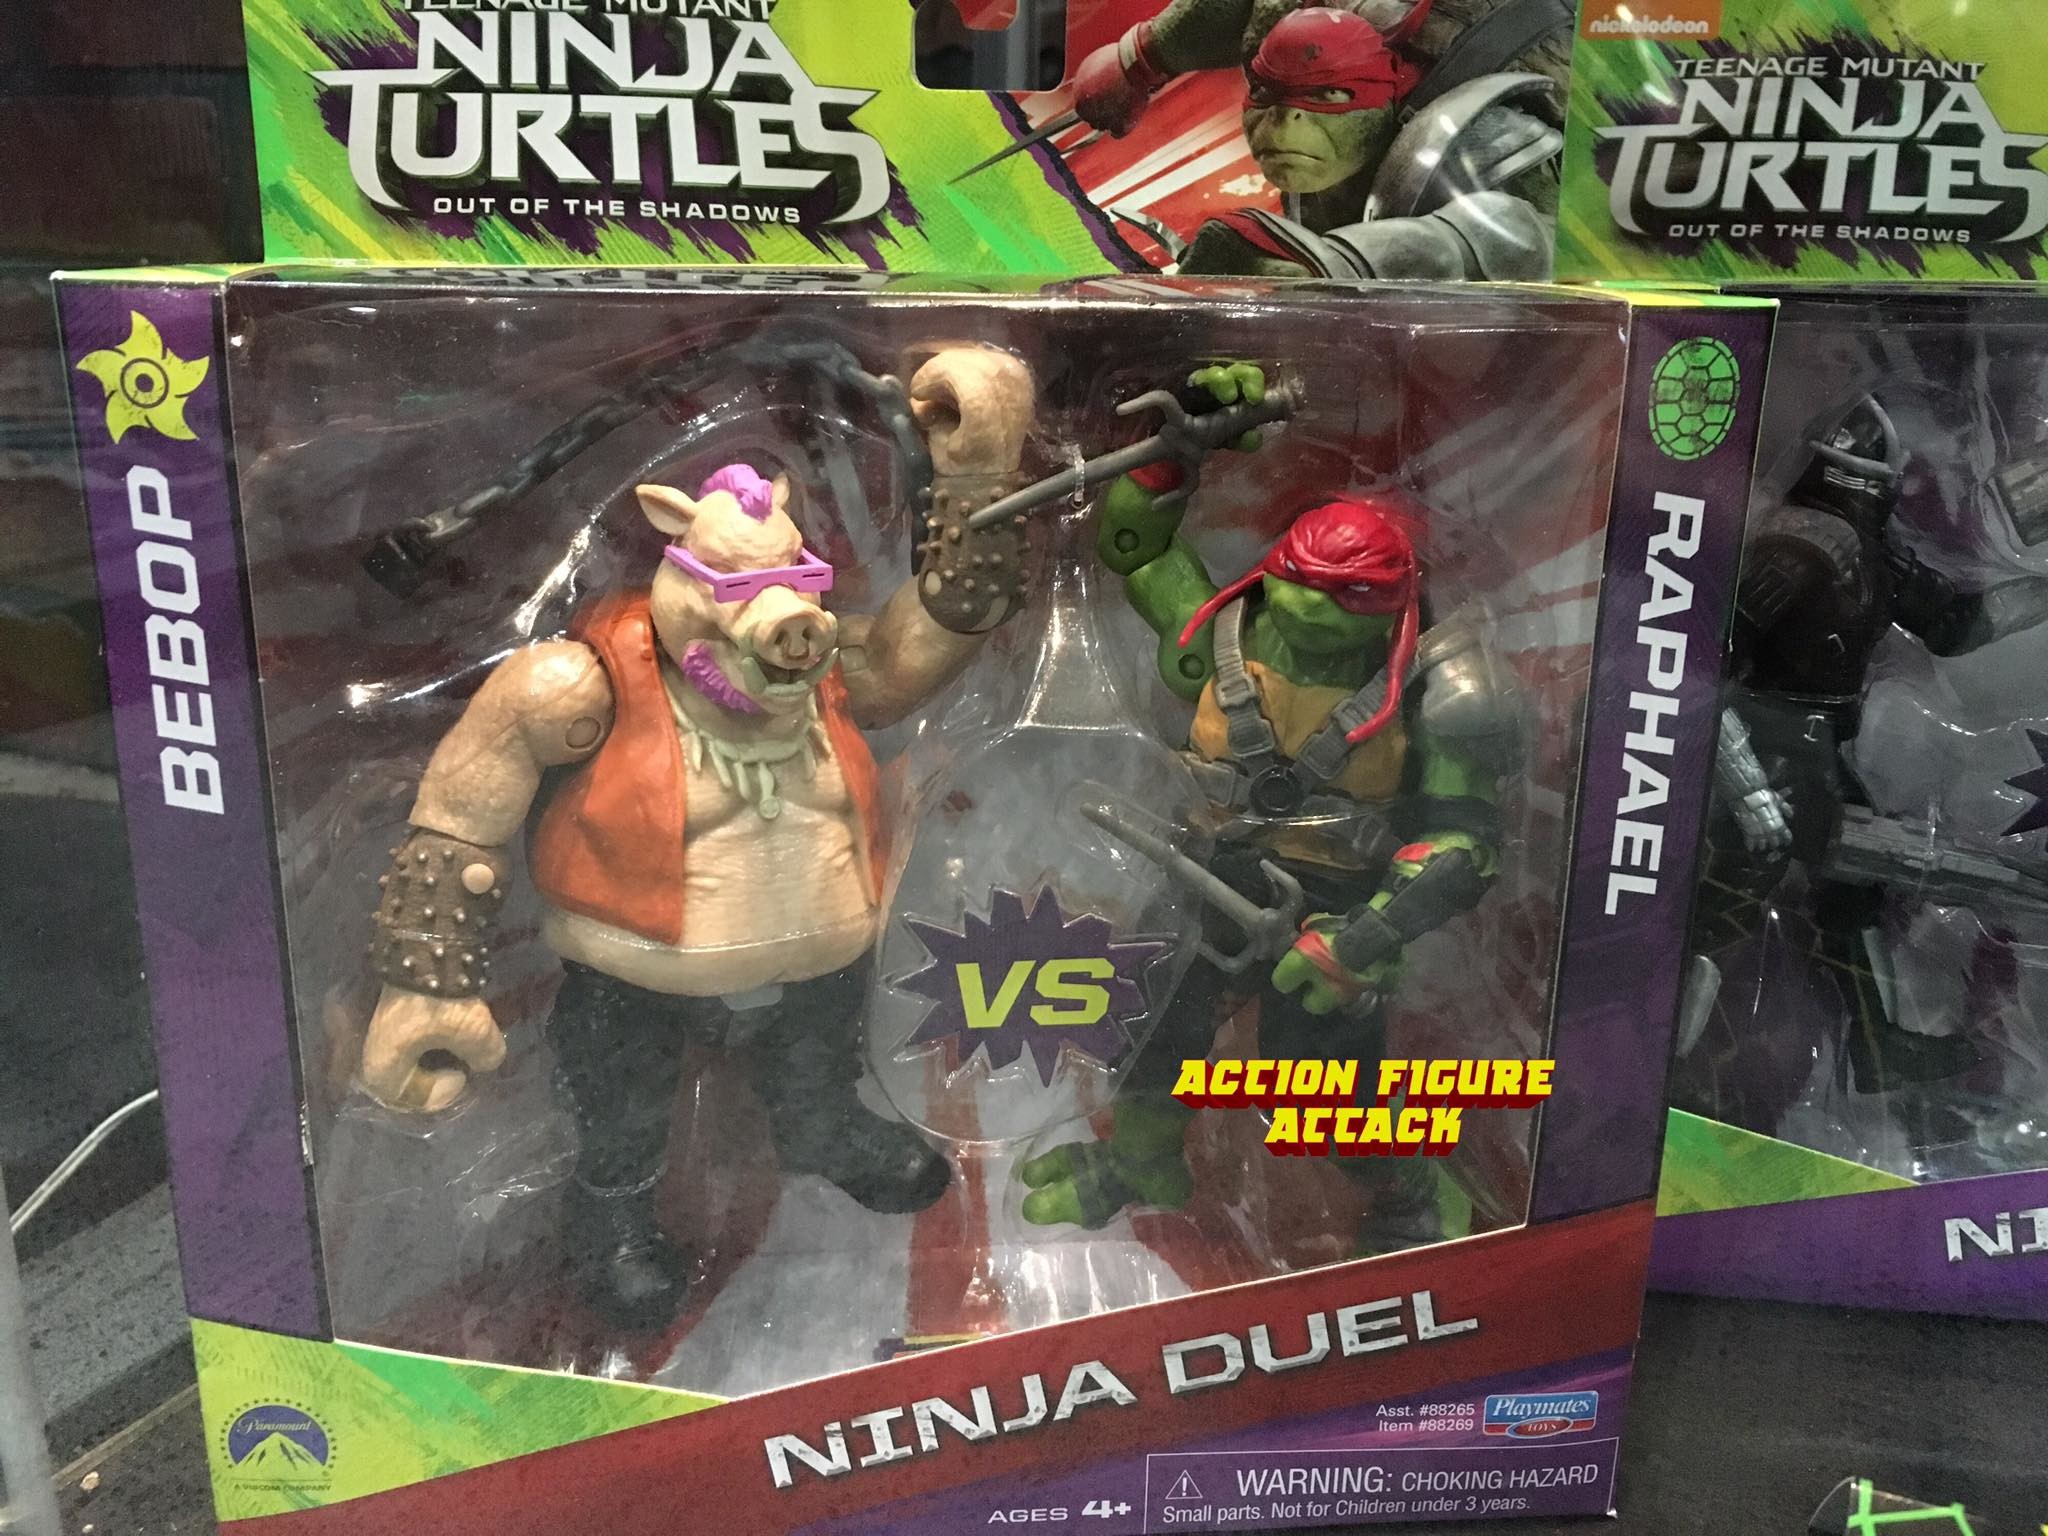 2048x1536 Teenage Mutant Ninja Turtles: Out of the Shadows Figures at WonderCon -  Additional Images